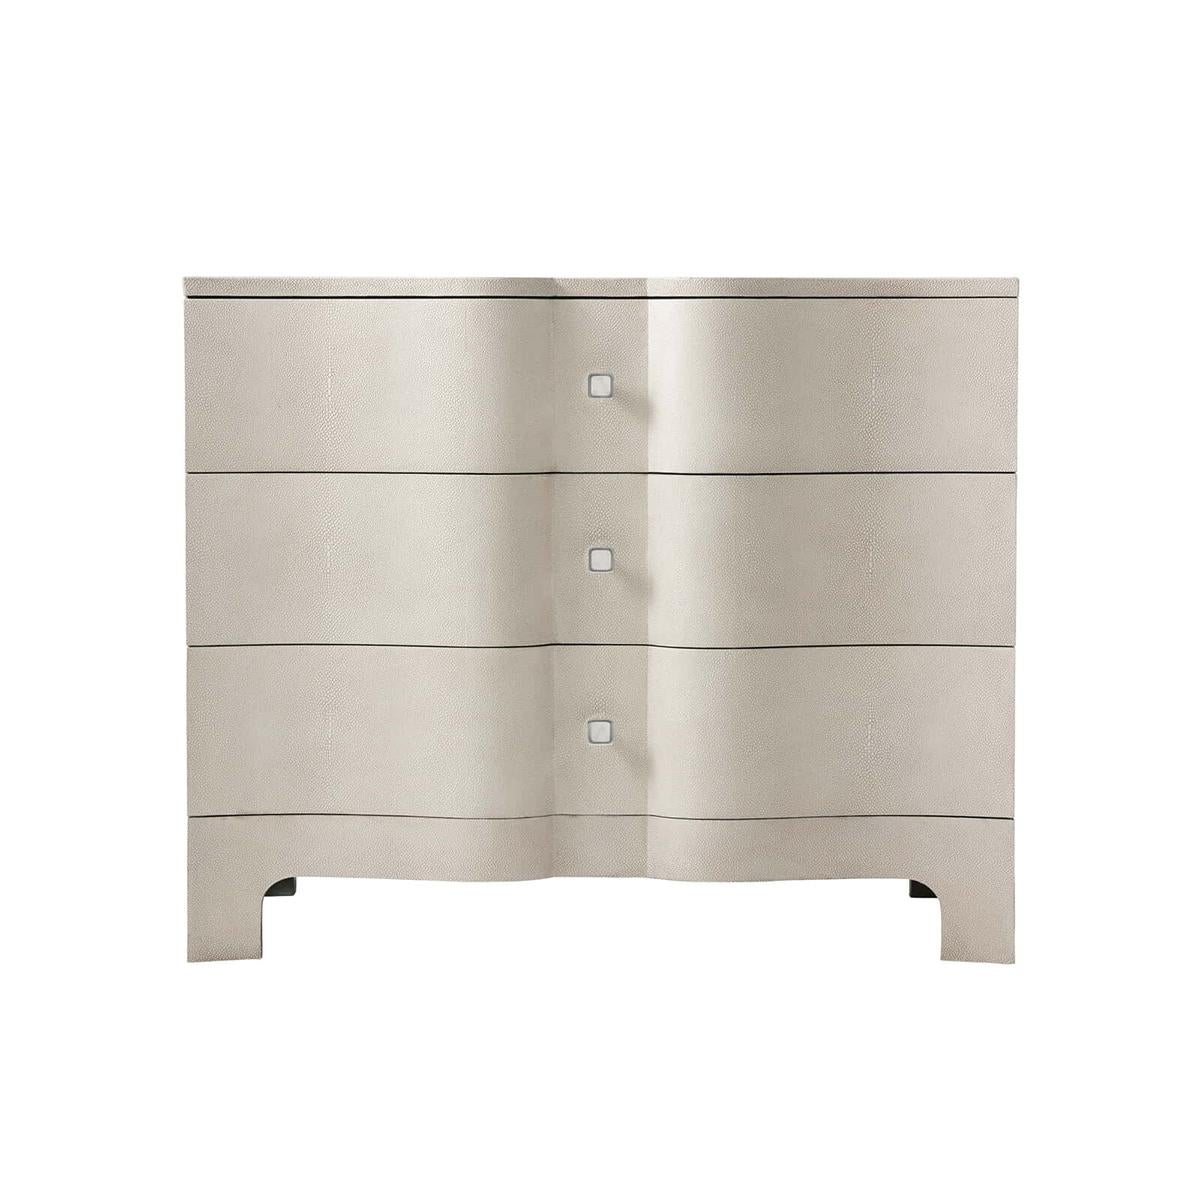 Modern Serpentine leather wrapped nightstand with a shagreen embossed leather in our light overcast finish, with polished nickel hardware and raised on bracket feet.

A wonderful modern interpretation of a Rococo Chippendale design from the 18th